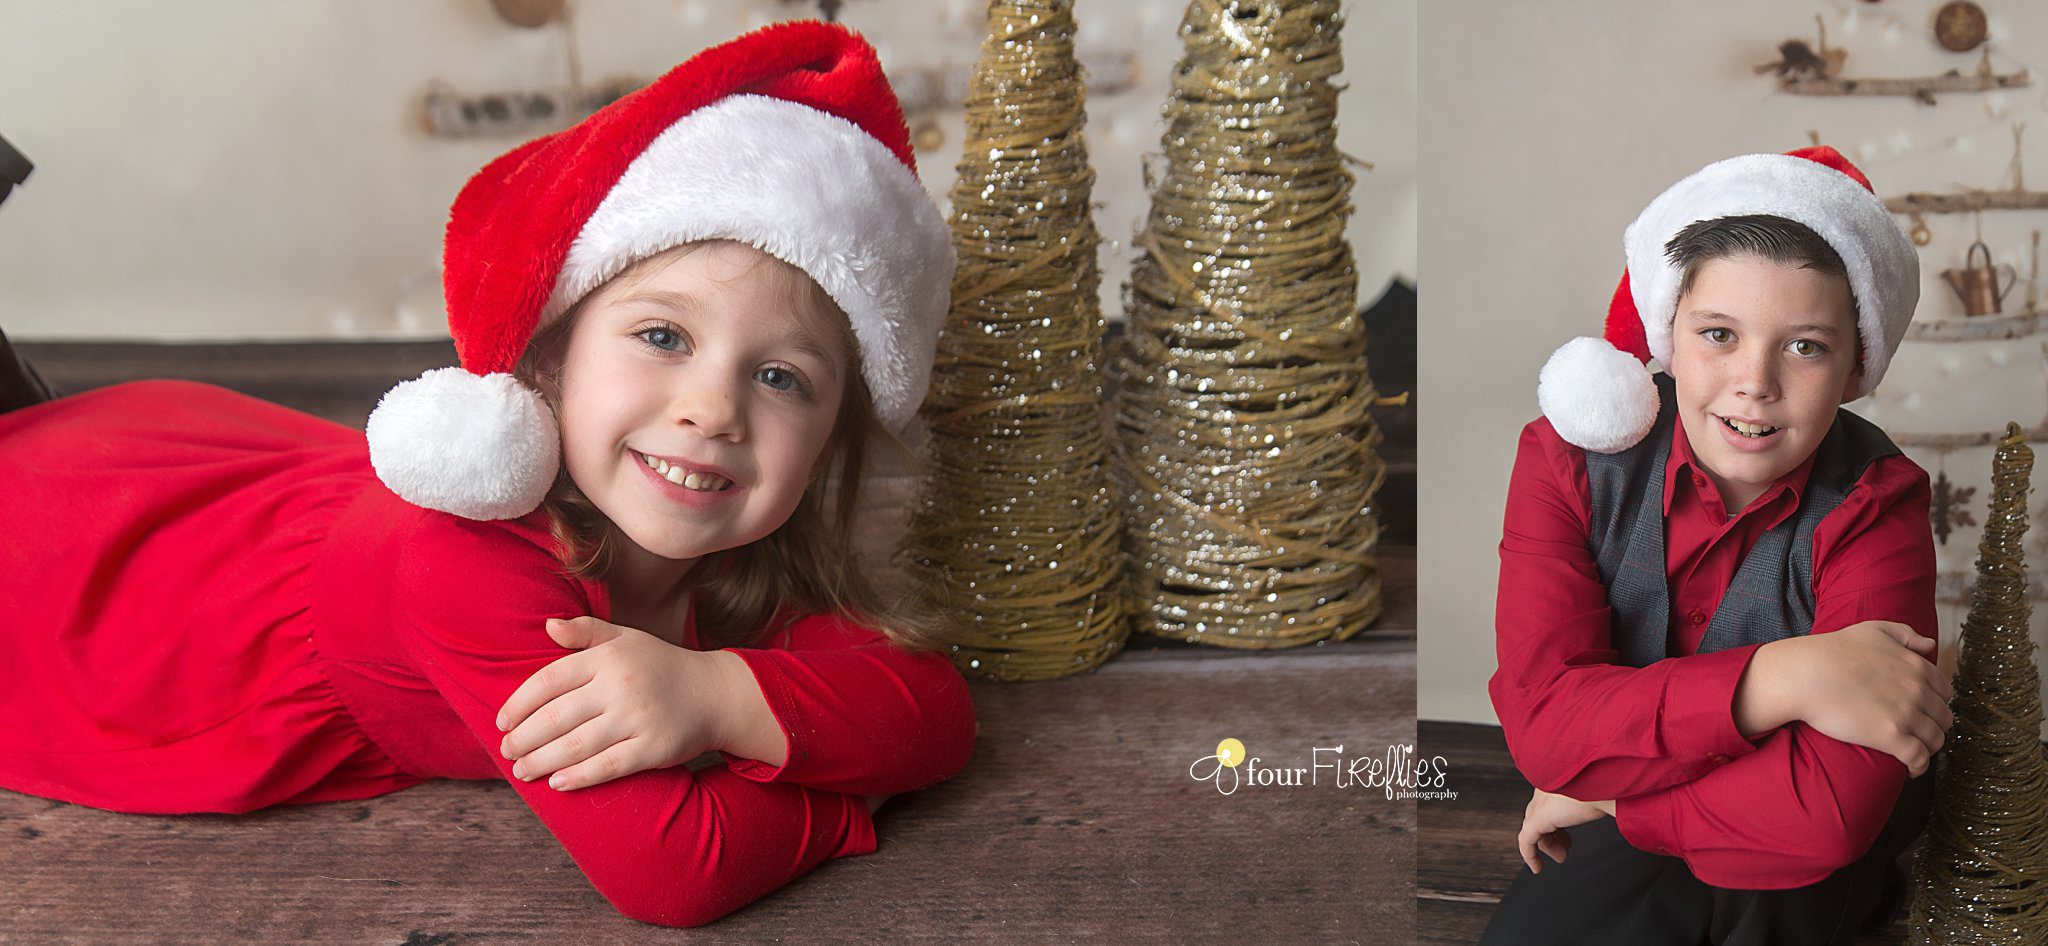 st-louis-photography-studio-kids-in-red -with-rustic-christmas-trees.jpg